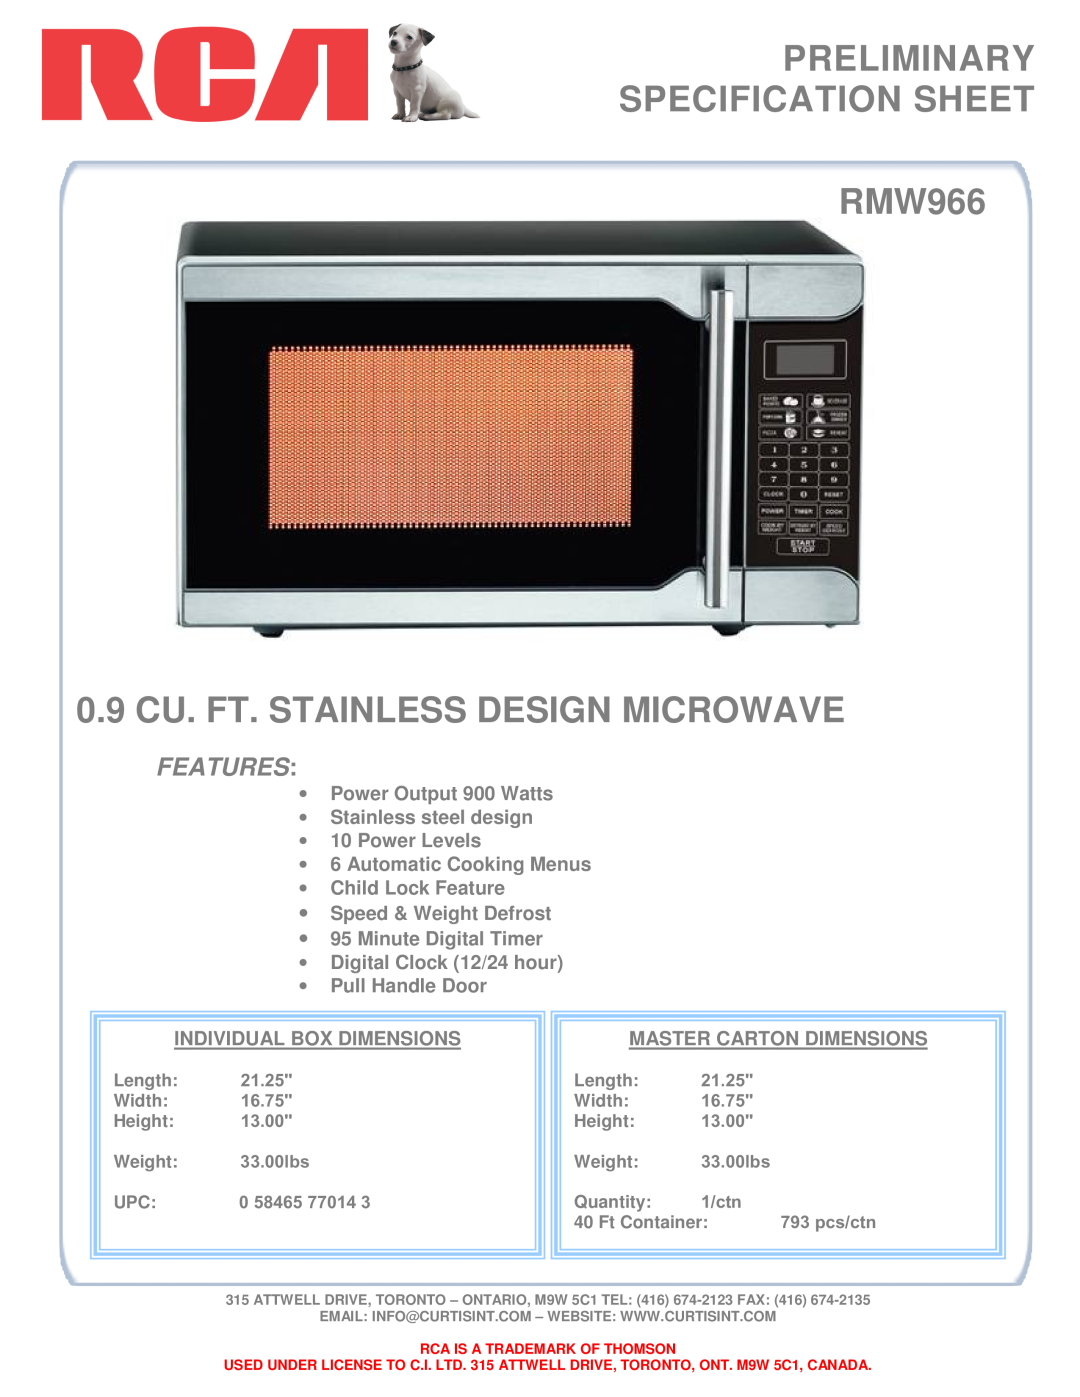 Curtis dimensions PRELIMINARY SPECIFICATION SHEET RMW966, 0.9 CU. FT. STAINLESS DESIGN MICROWAVE, Features 